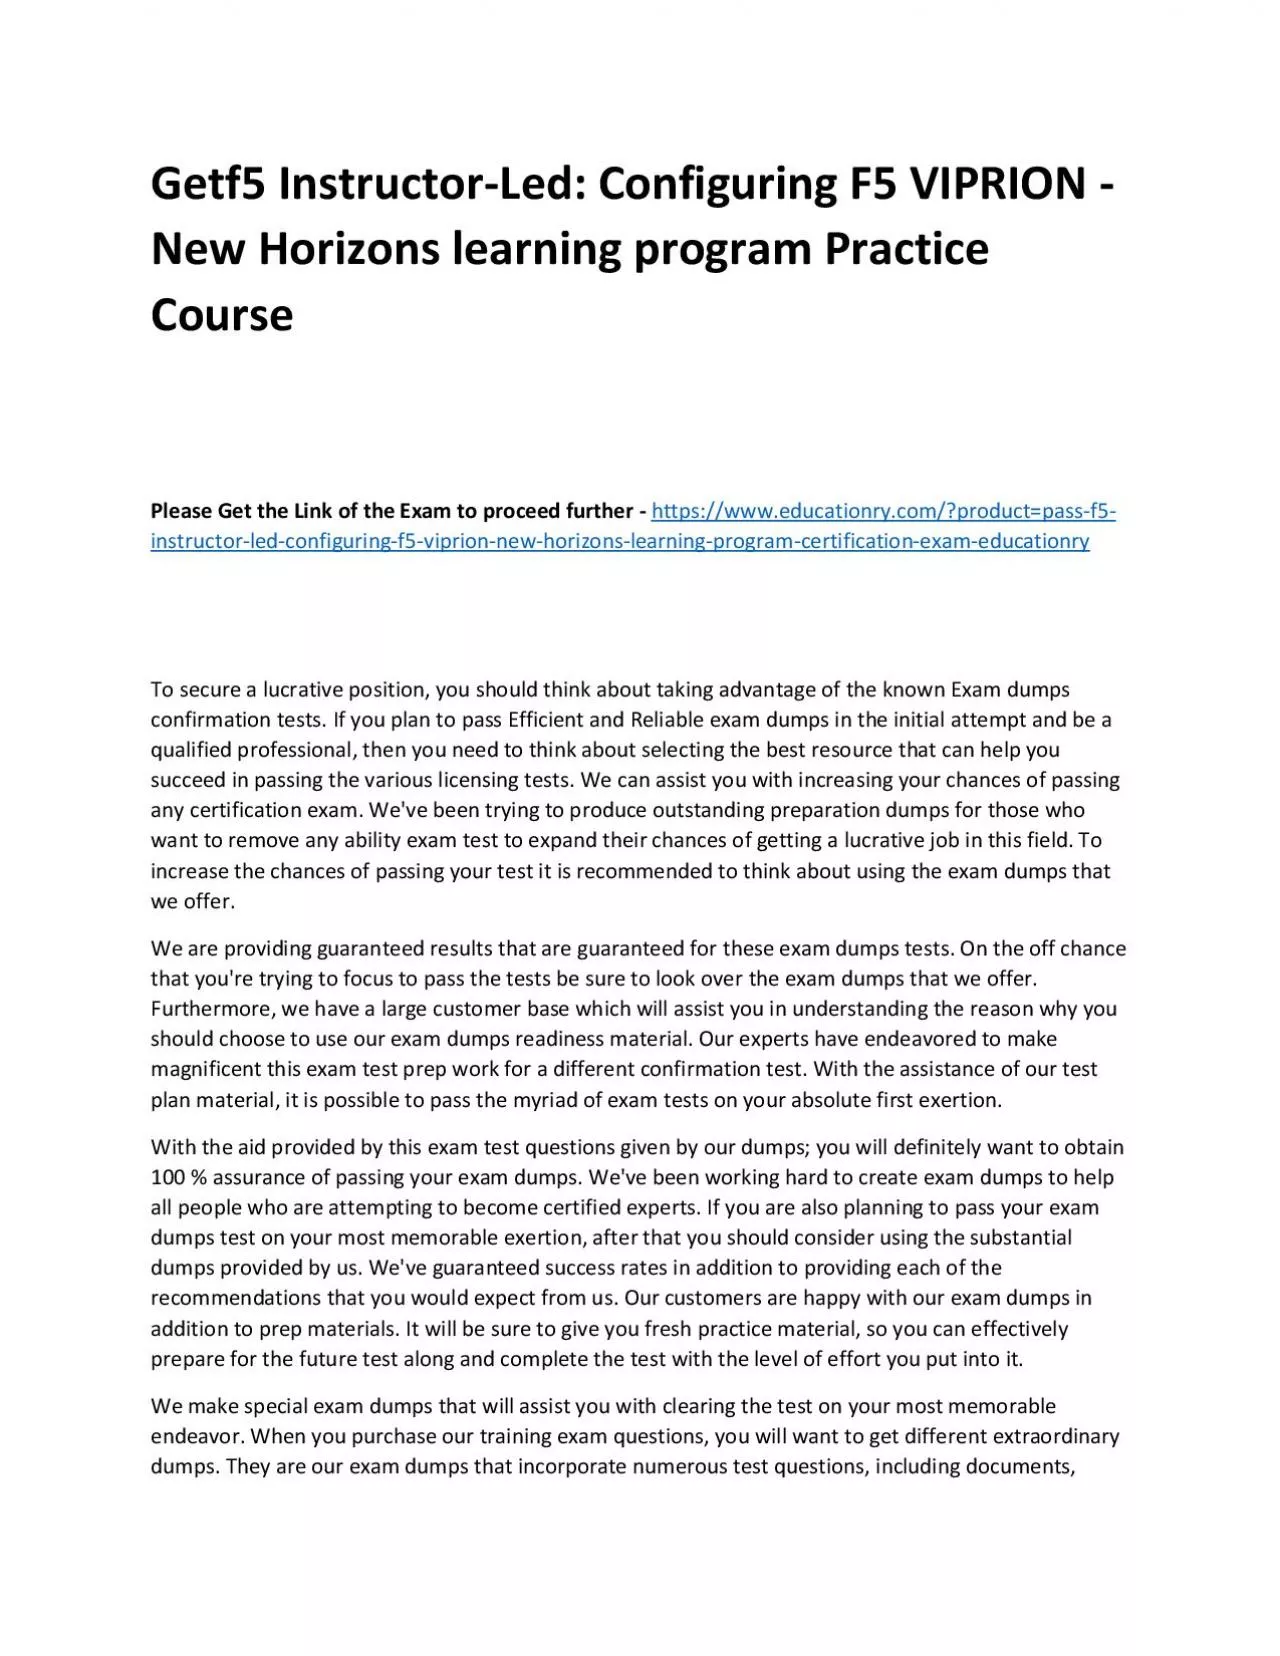 f5 Instructor-Led: Configuring F5 VIPRION - New Horizons learning program